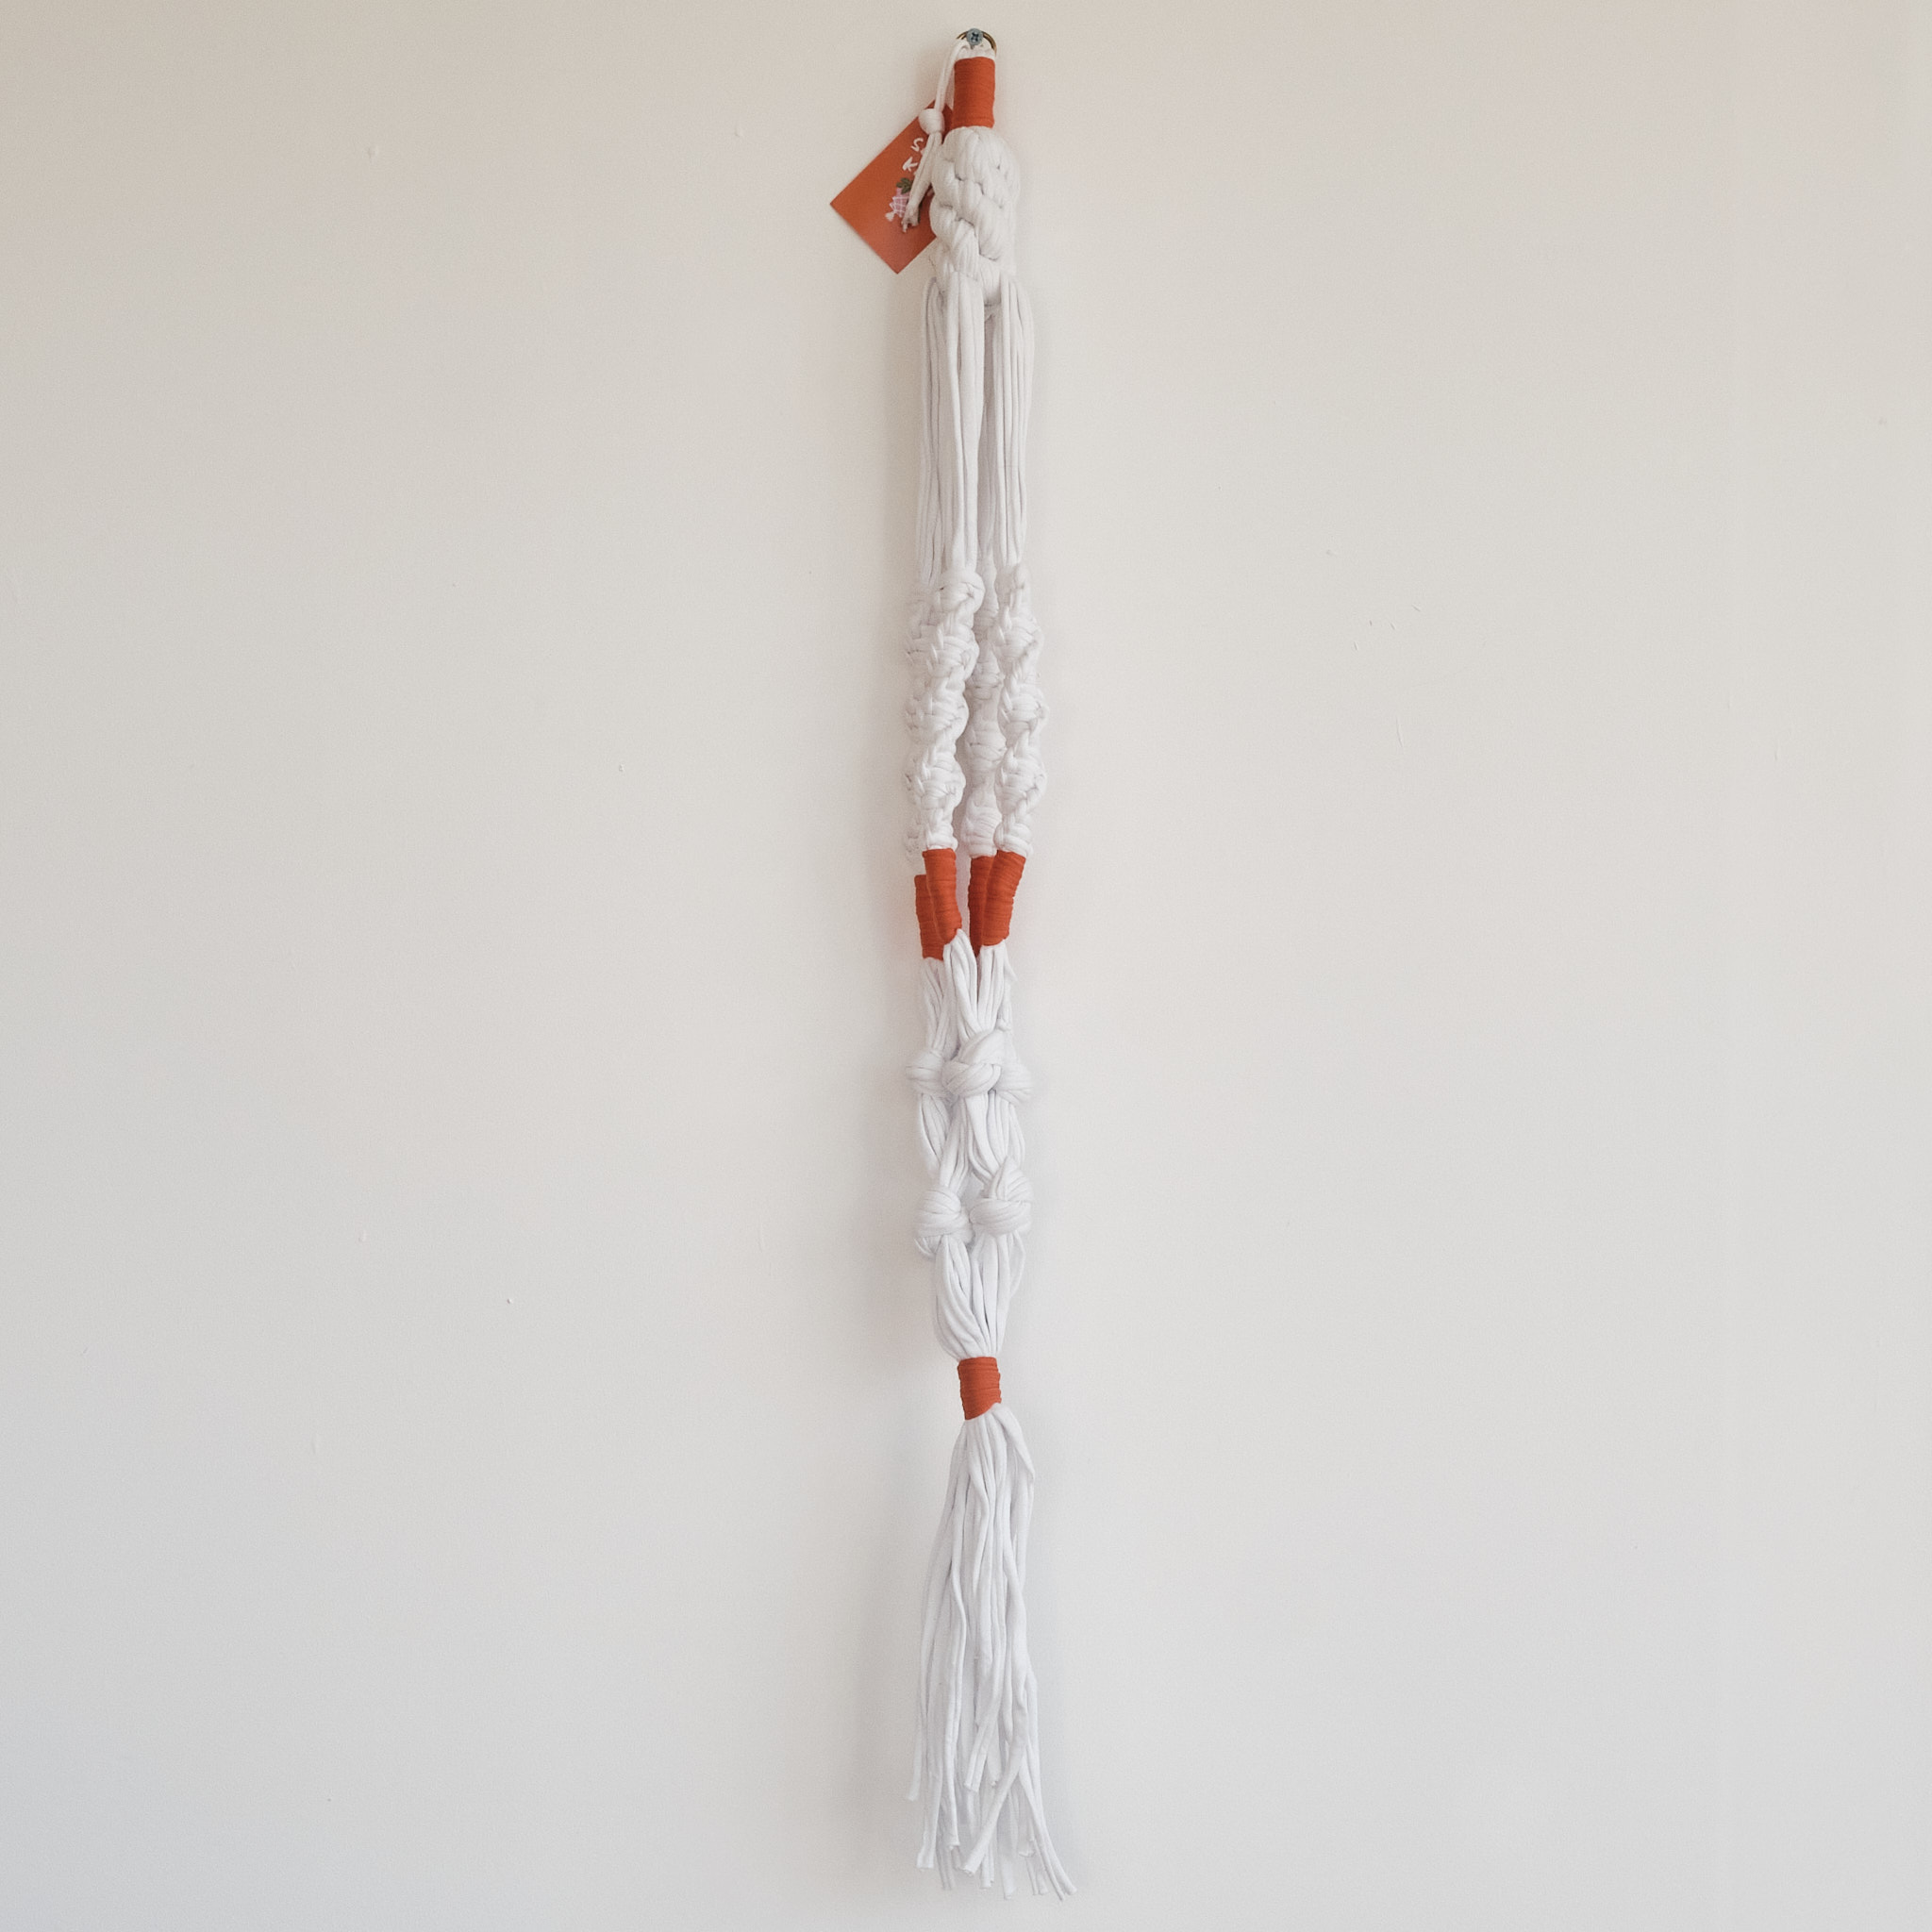 Sarora Knots Recycled Cotton Plant Hanger - Long in White & Bold Orange